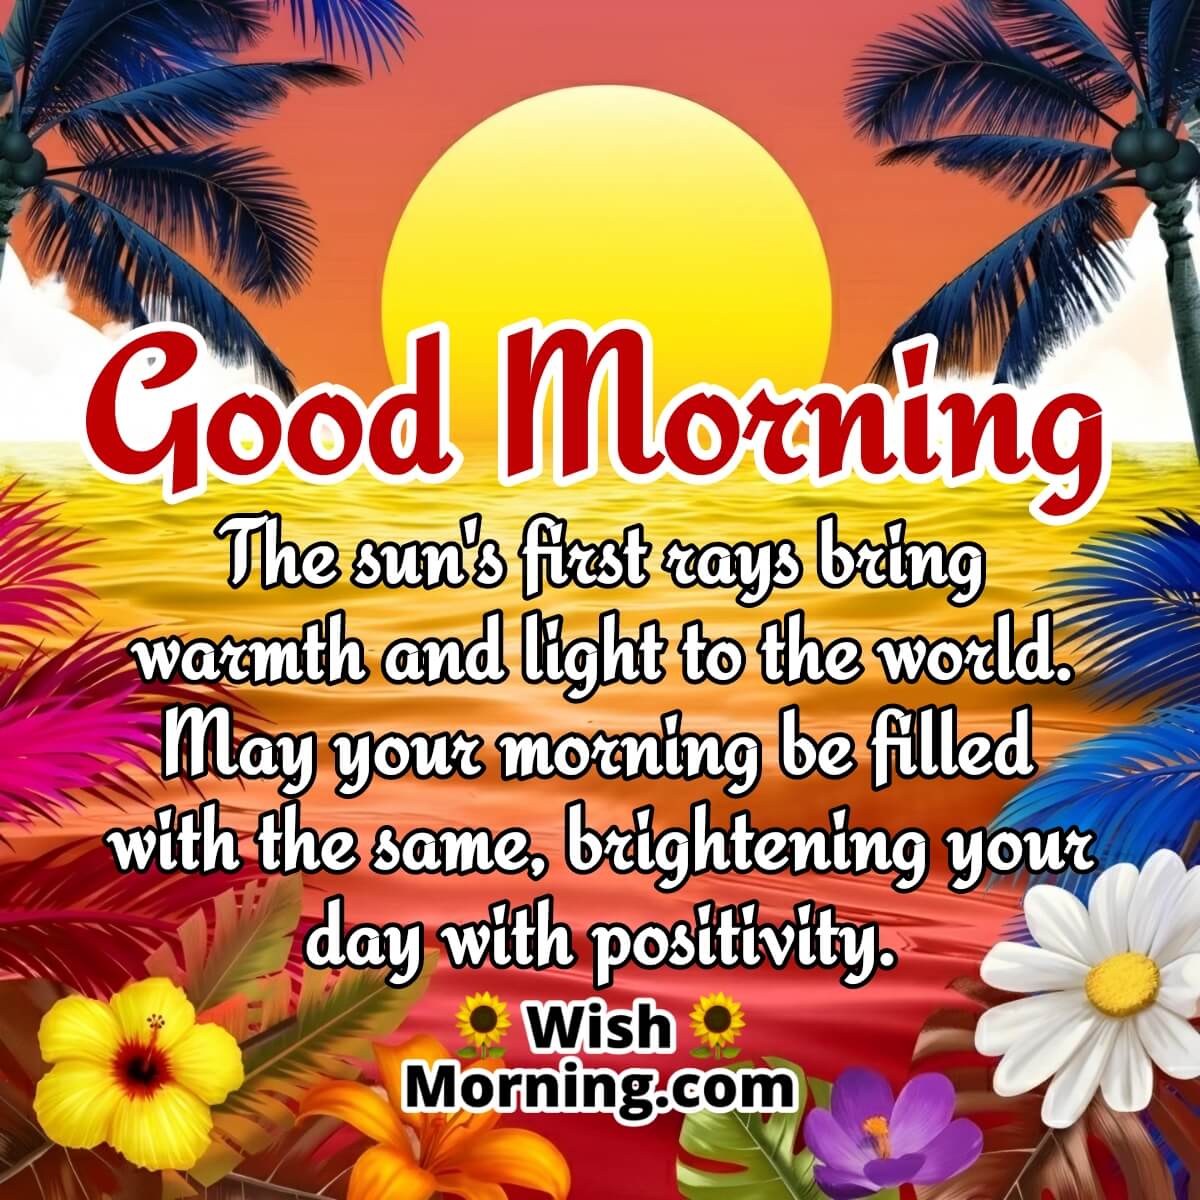 Good Morning Quote Wishes On Sunrise